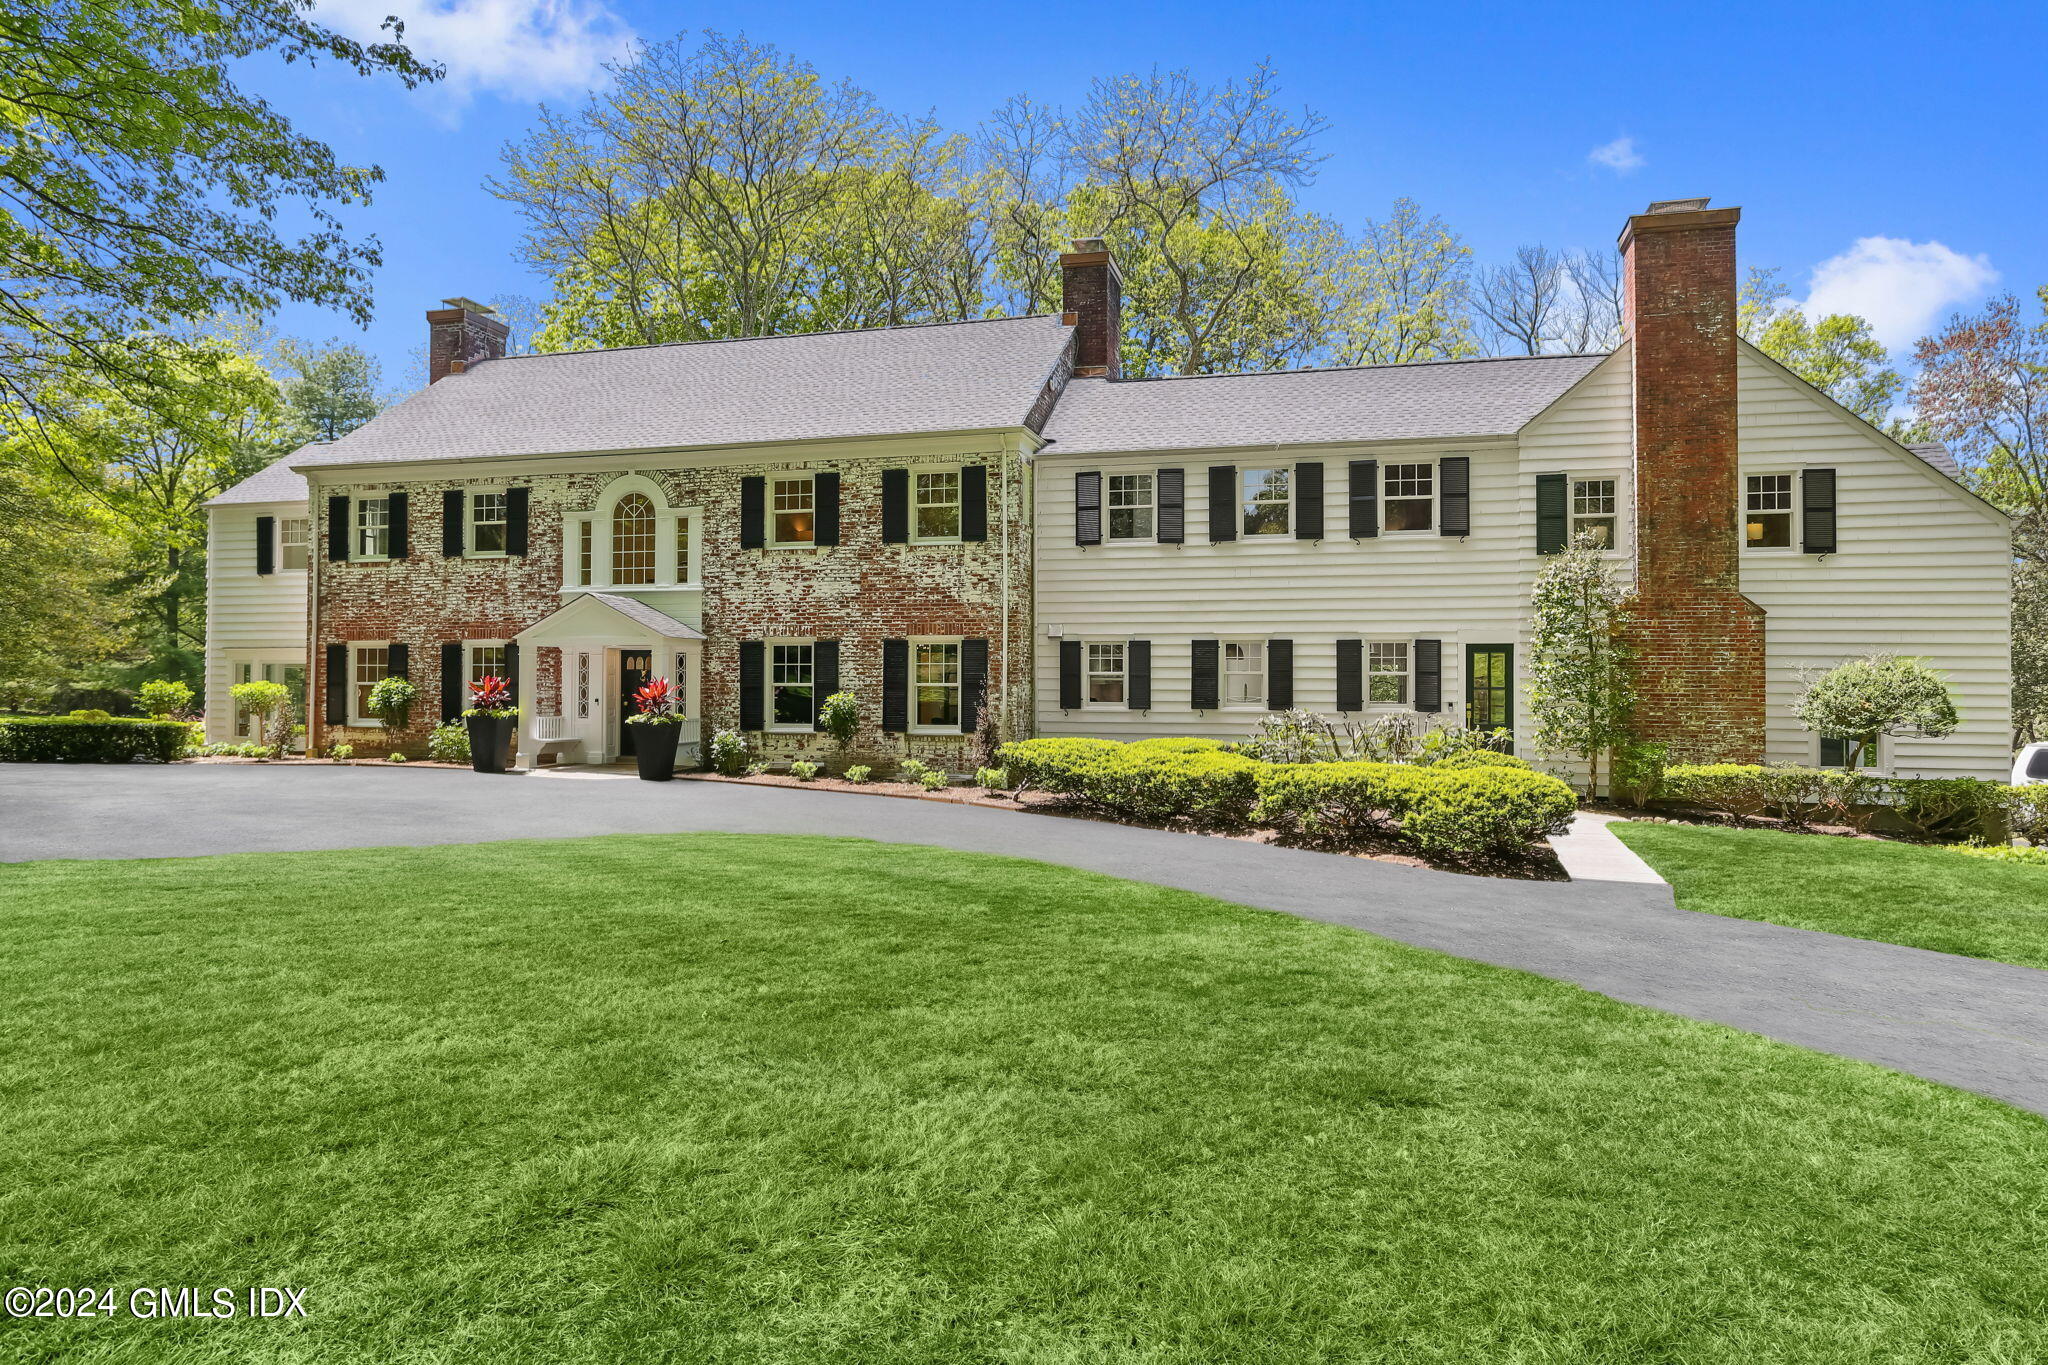 530 Round Hill Road, Greenwich, Connecticut - 6 Bedrooms  
7 Bathrooms - 